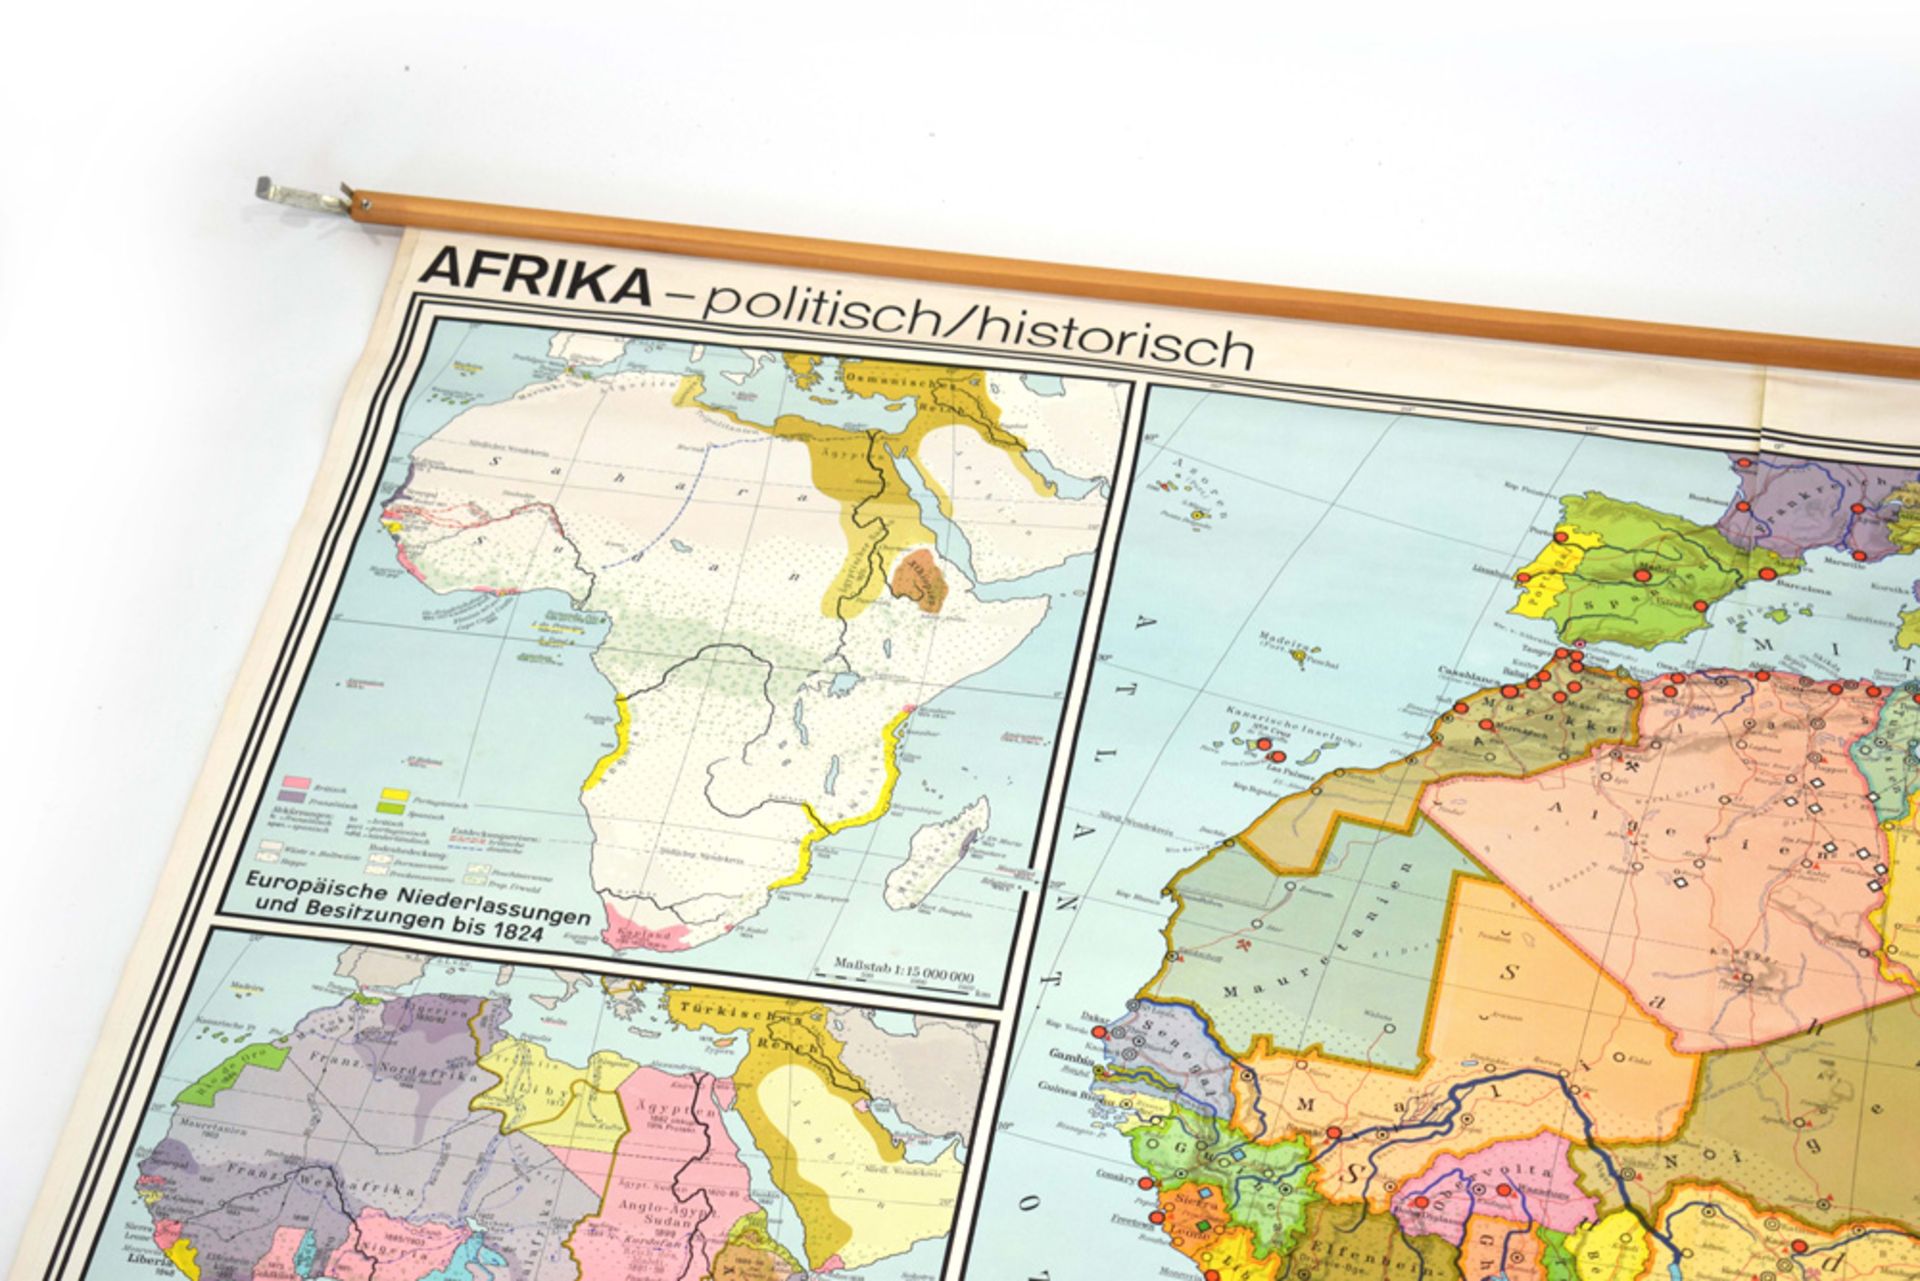 A 1979 Westermann historical and political wall chart of Africa, - Image 2 of 2